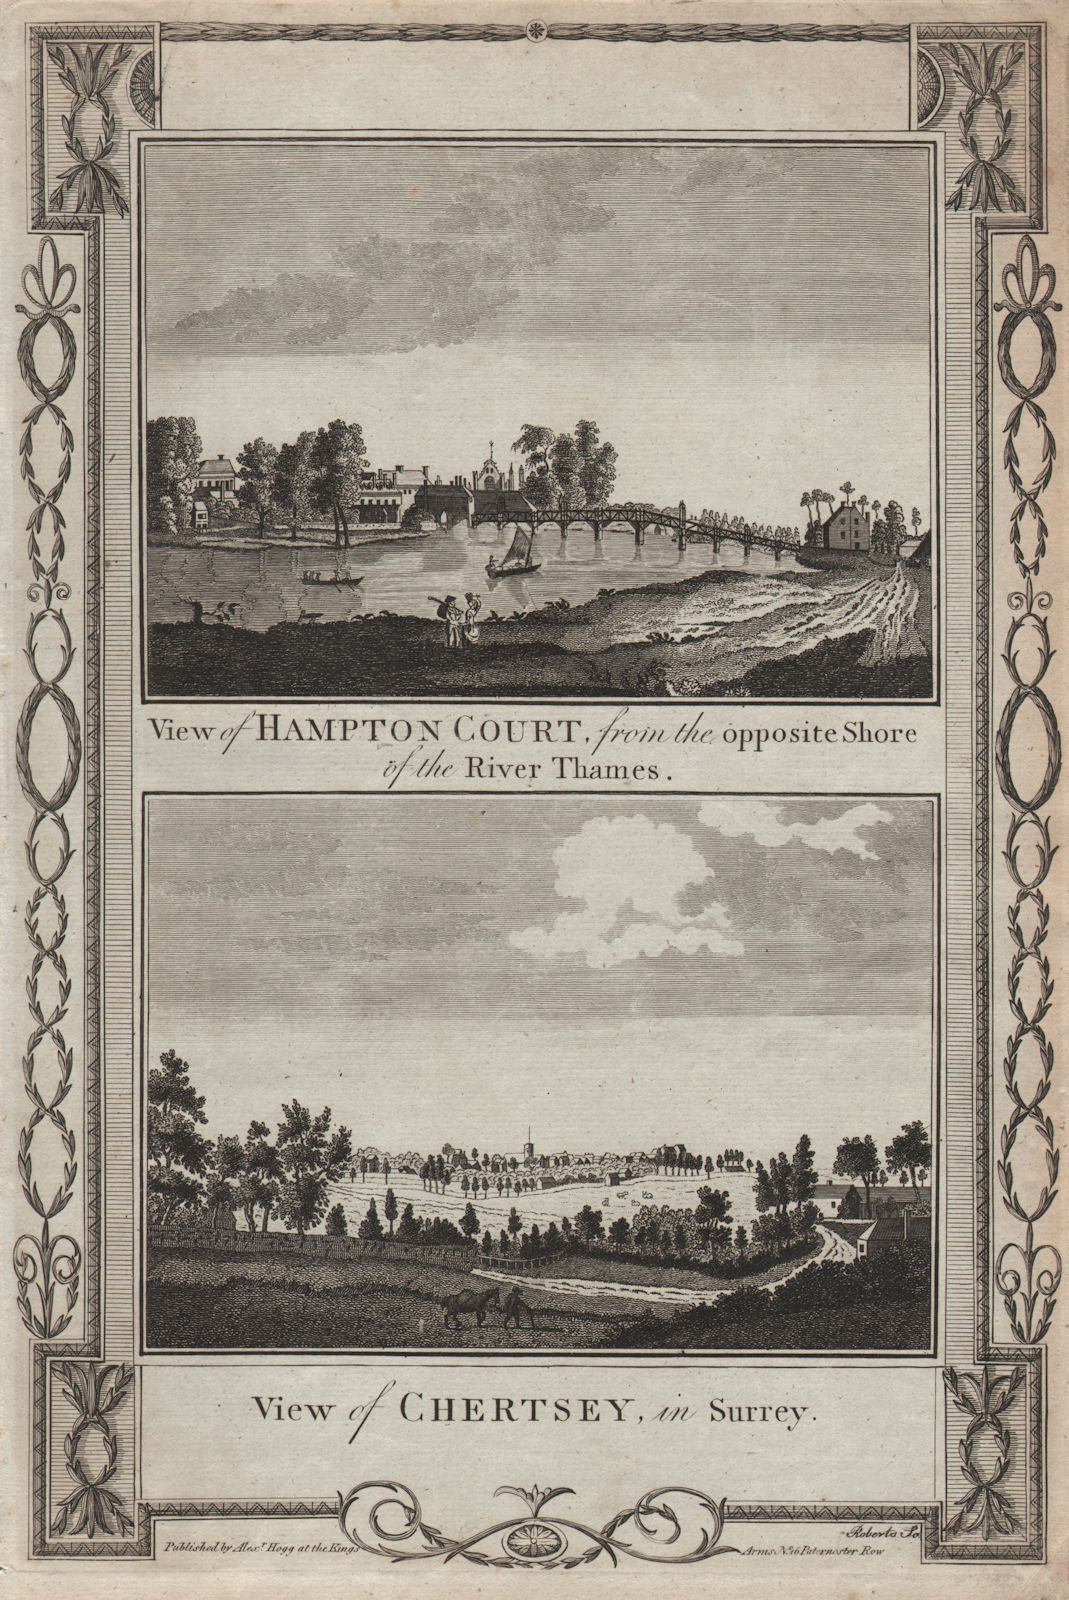 Views of Hampton Court, from East Molesey & Chertsey, in Surrey. THORNTON 1784